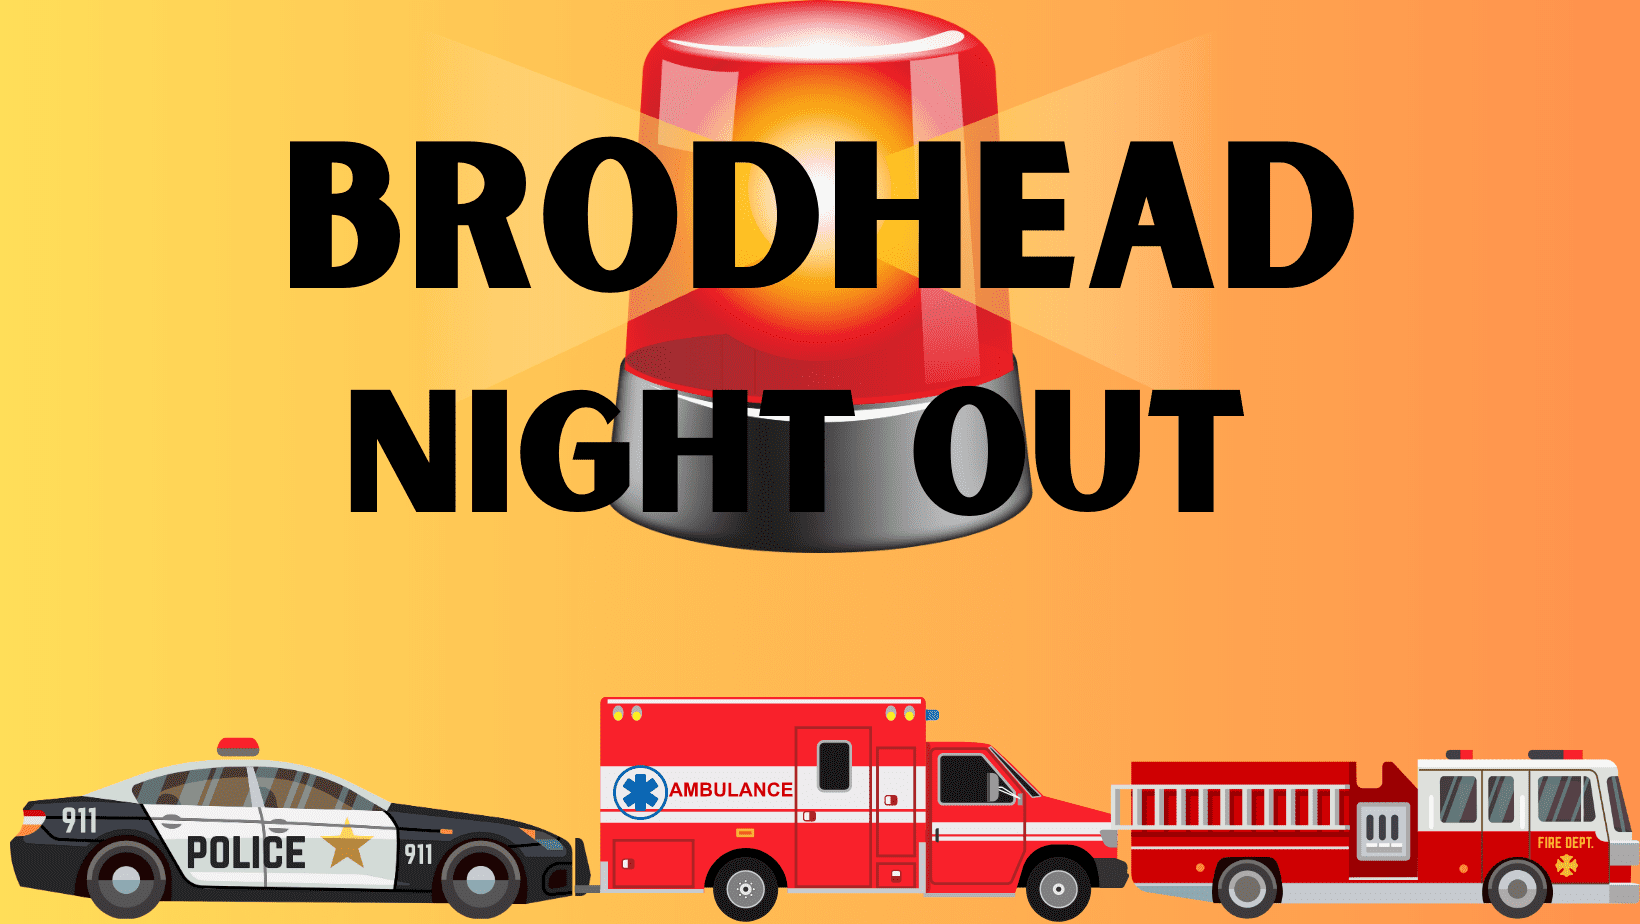 Brodhead Night Out